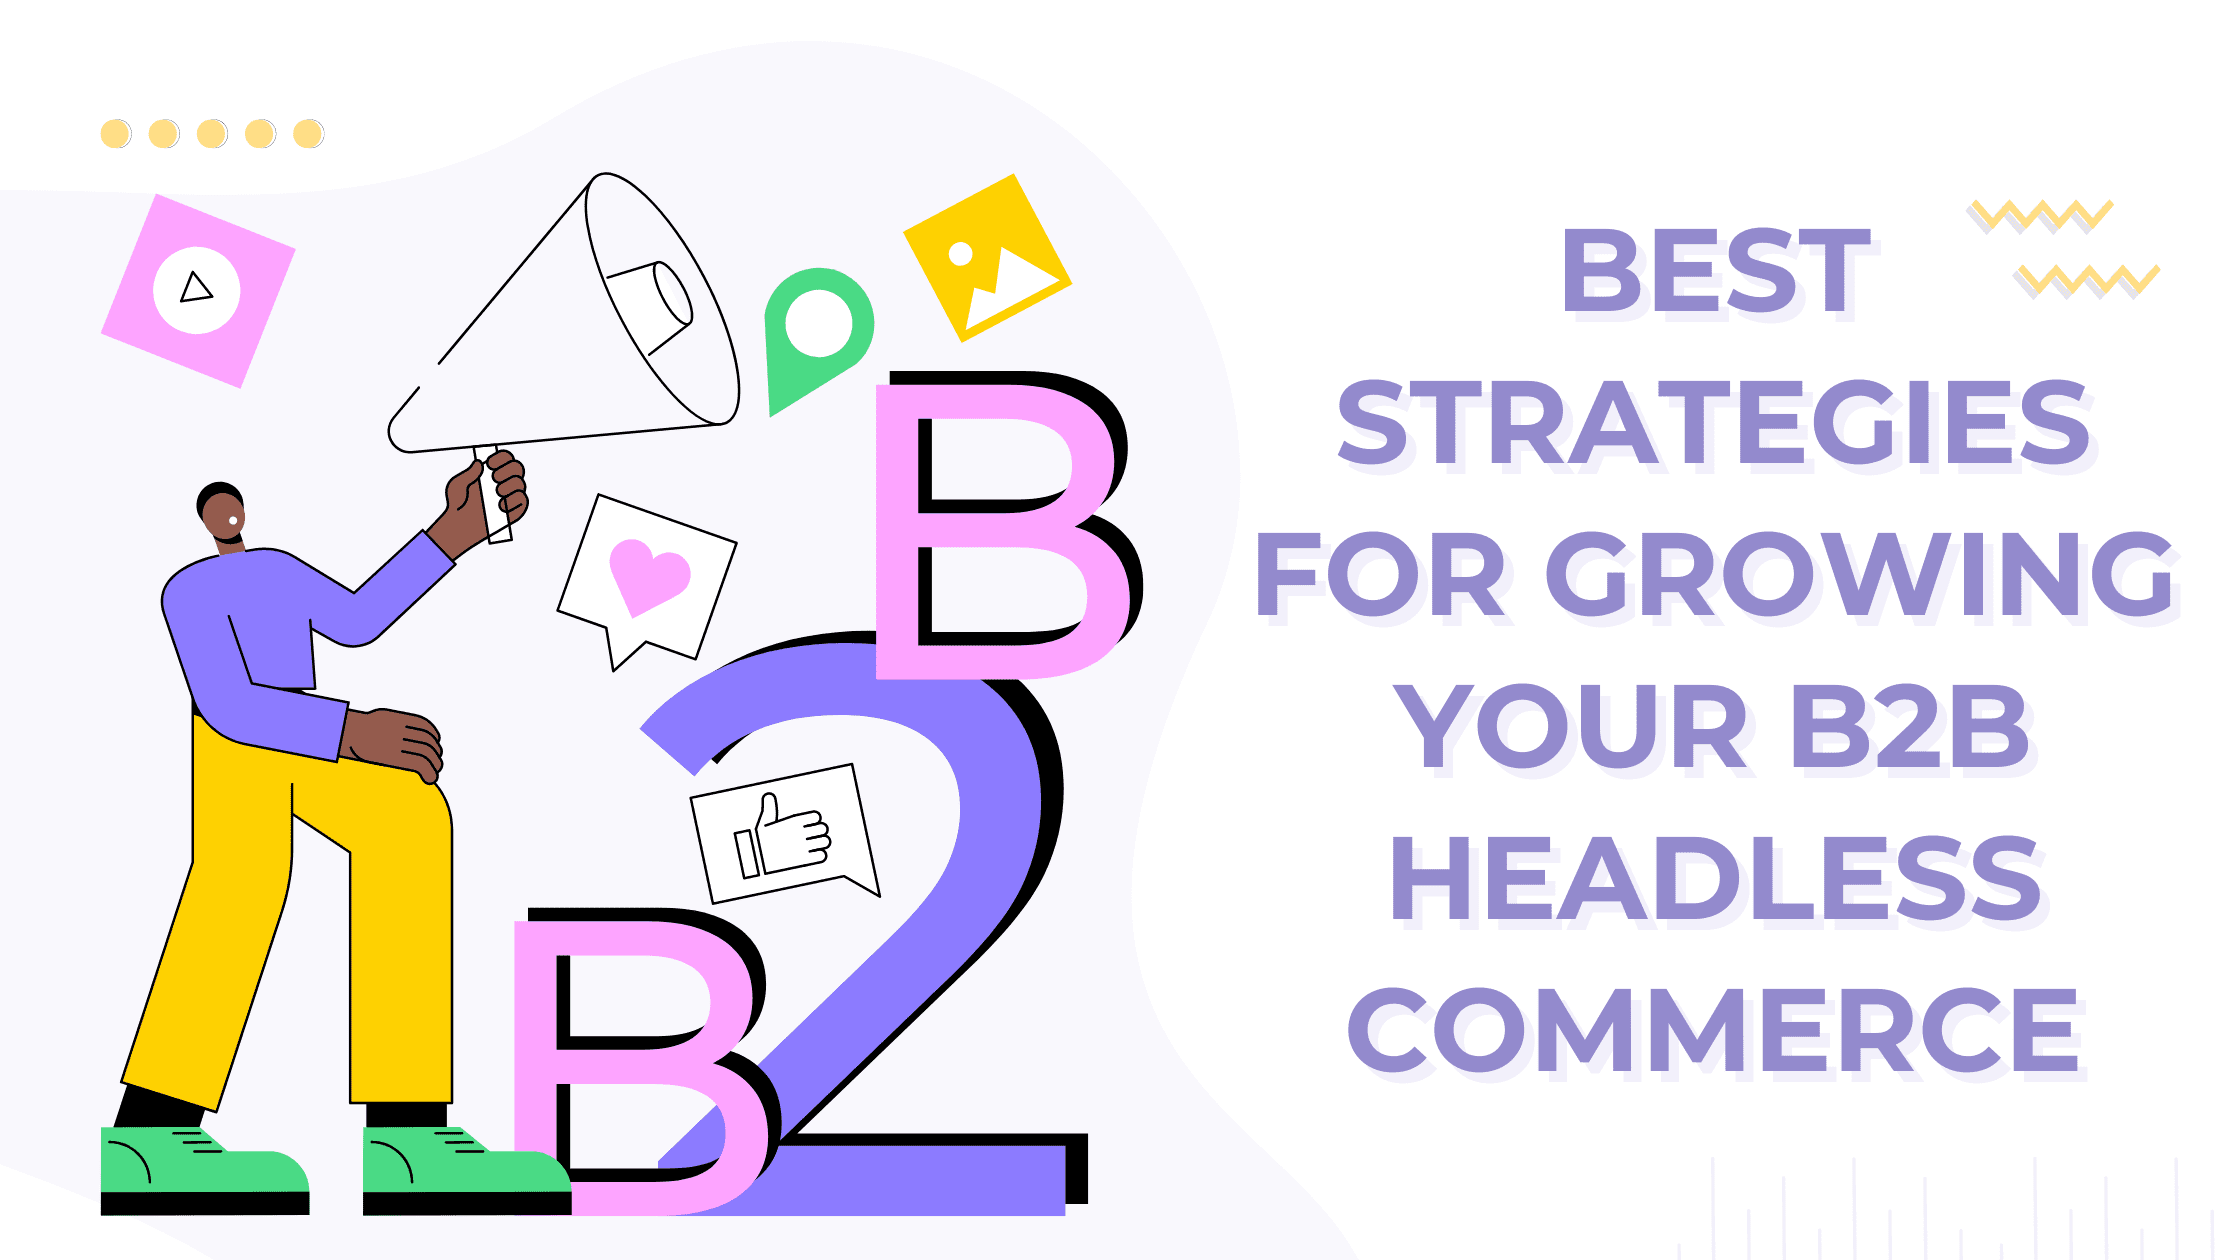 Best Strategies For Growing Your B2B Headless Commerce in 2023